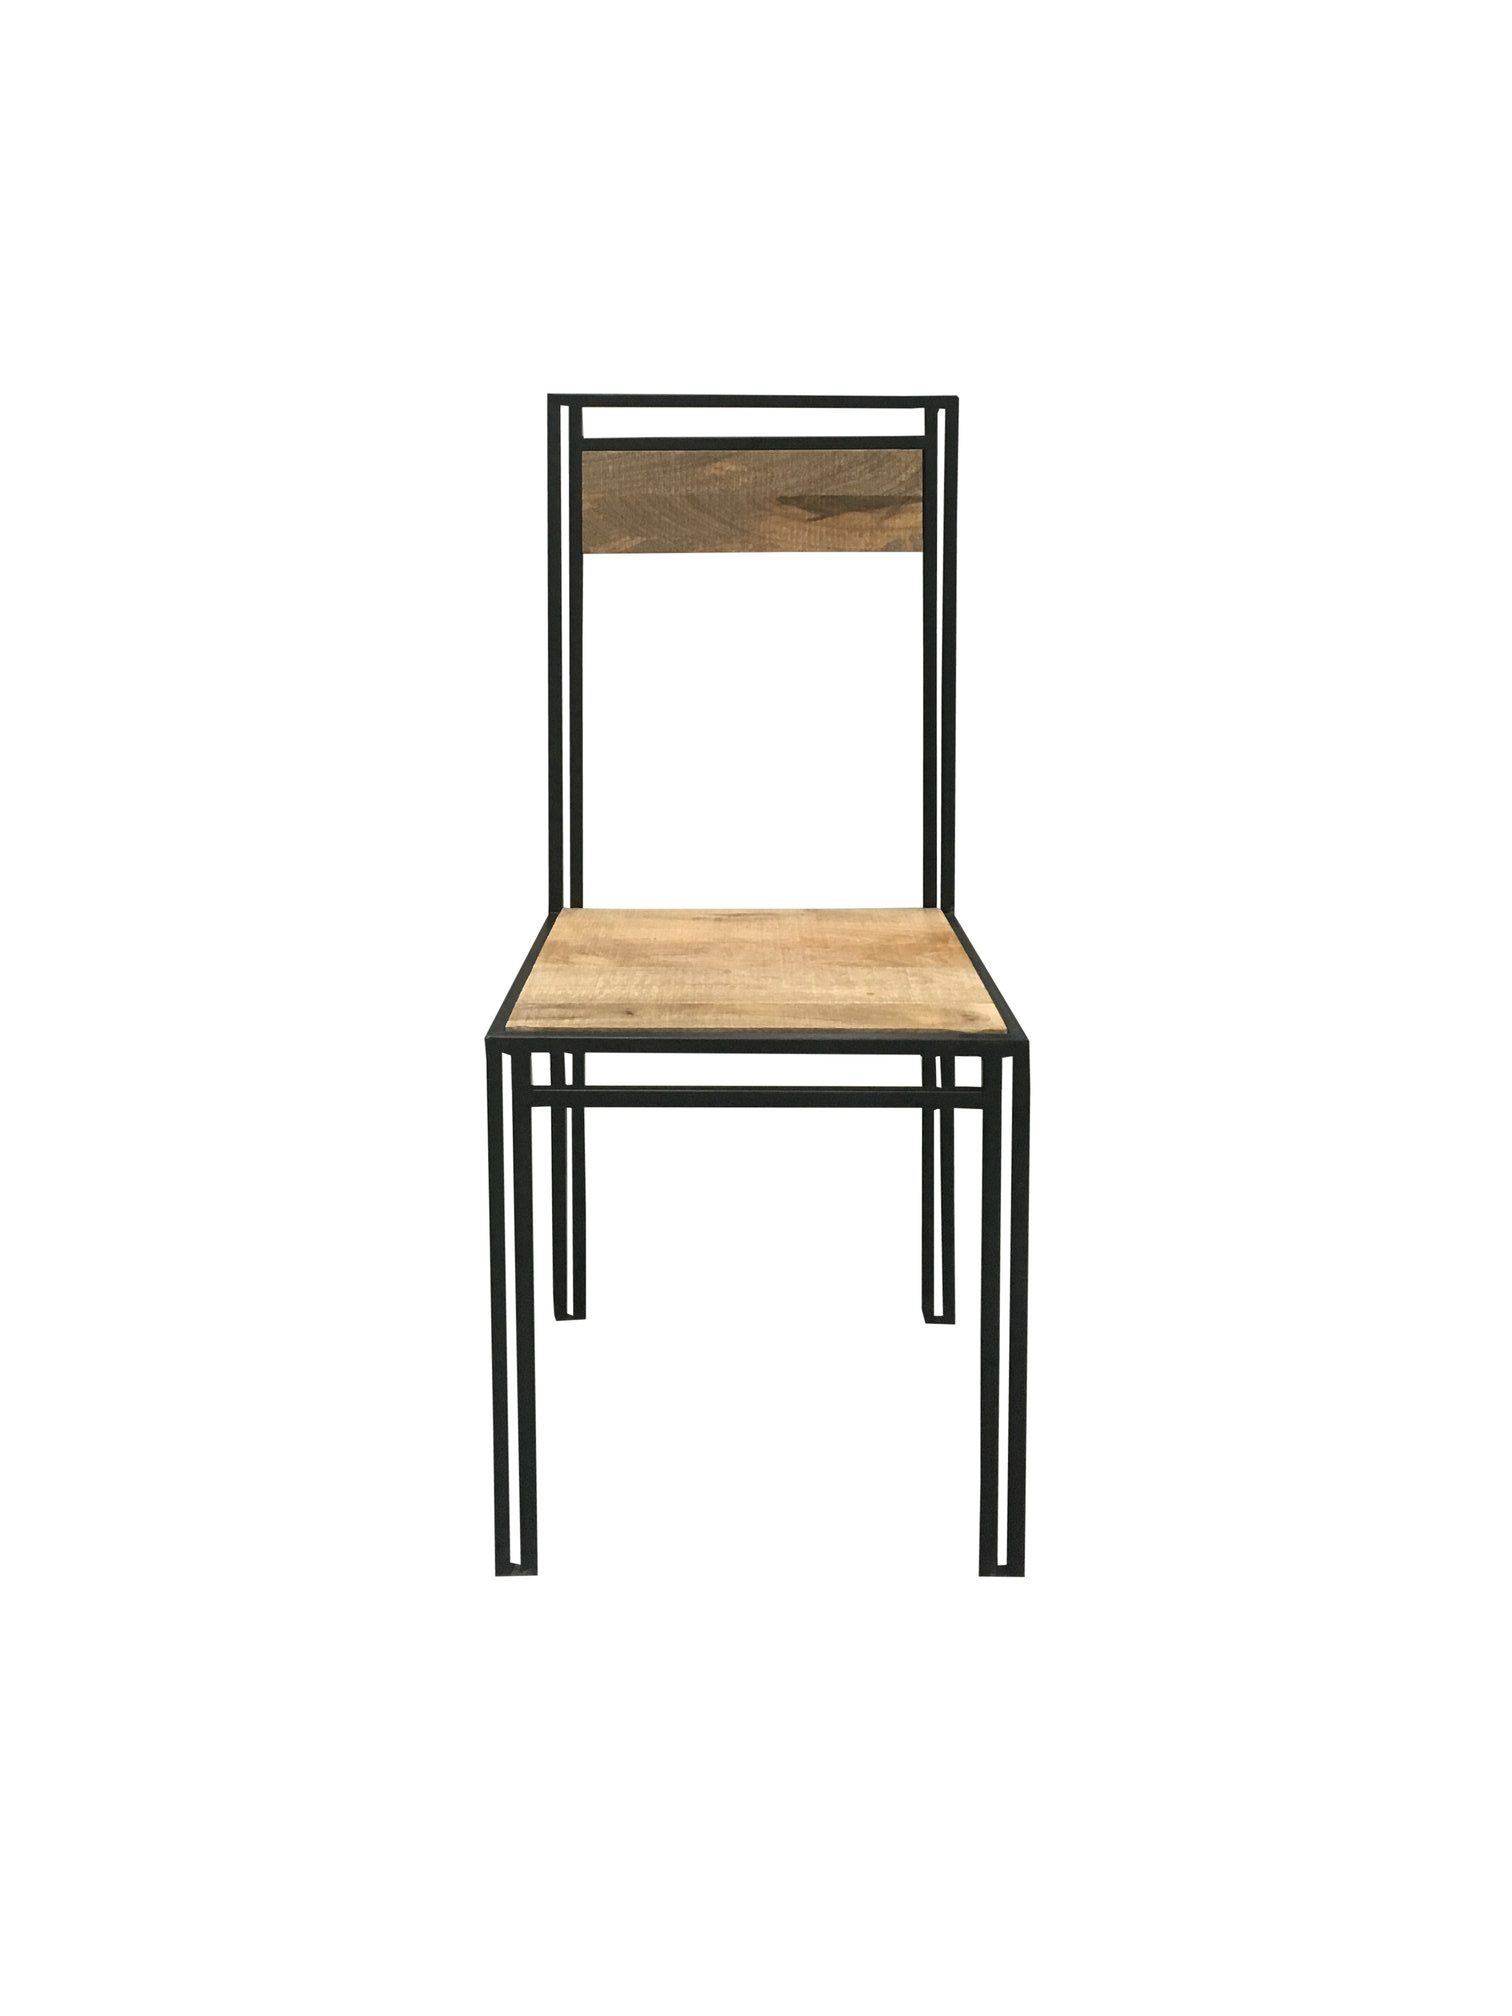 industrial style light mango wood dining chair with a metal frame